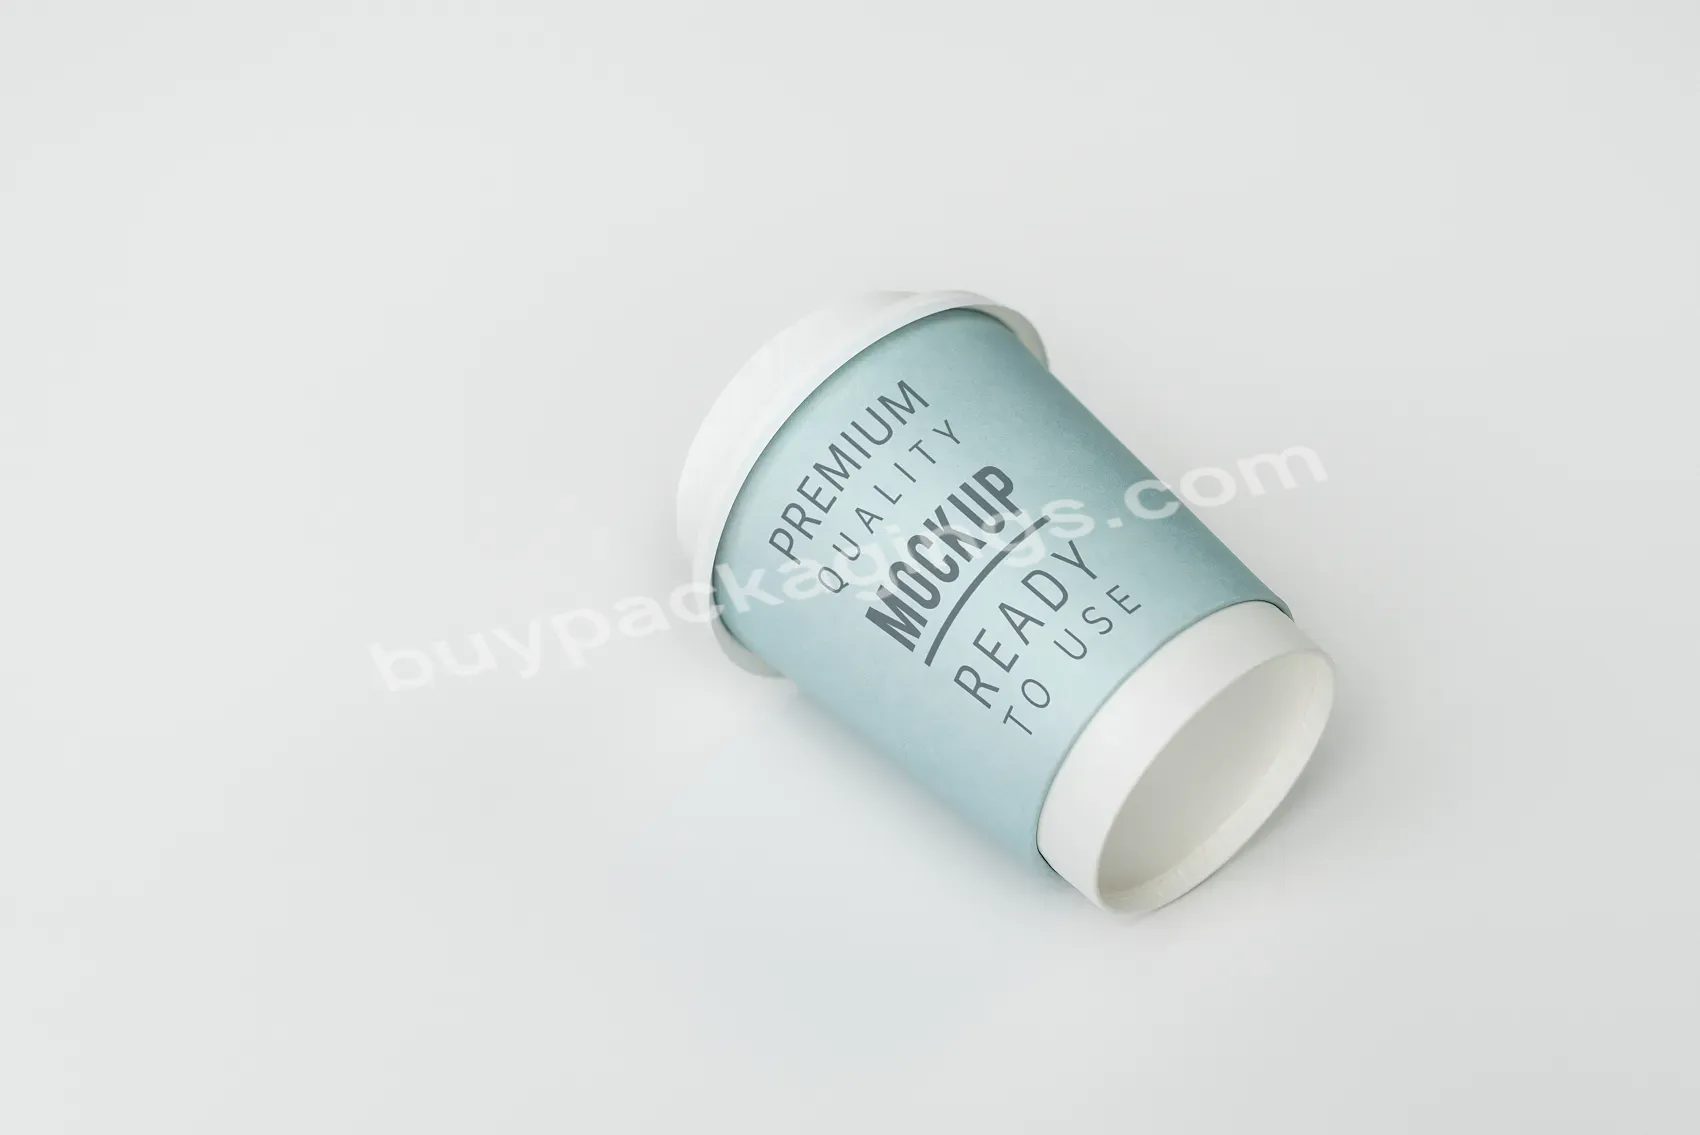 Custom Printed Disposable Coffee Cups Coffee Hot Drink Paper Cup Milk Tea Paper Cup - Buy Disposable Coffee Cups,Coffee Hot Drink Paper Cup,Milk Tea Paper Cup.